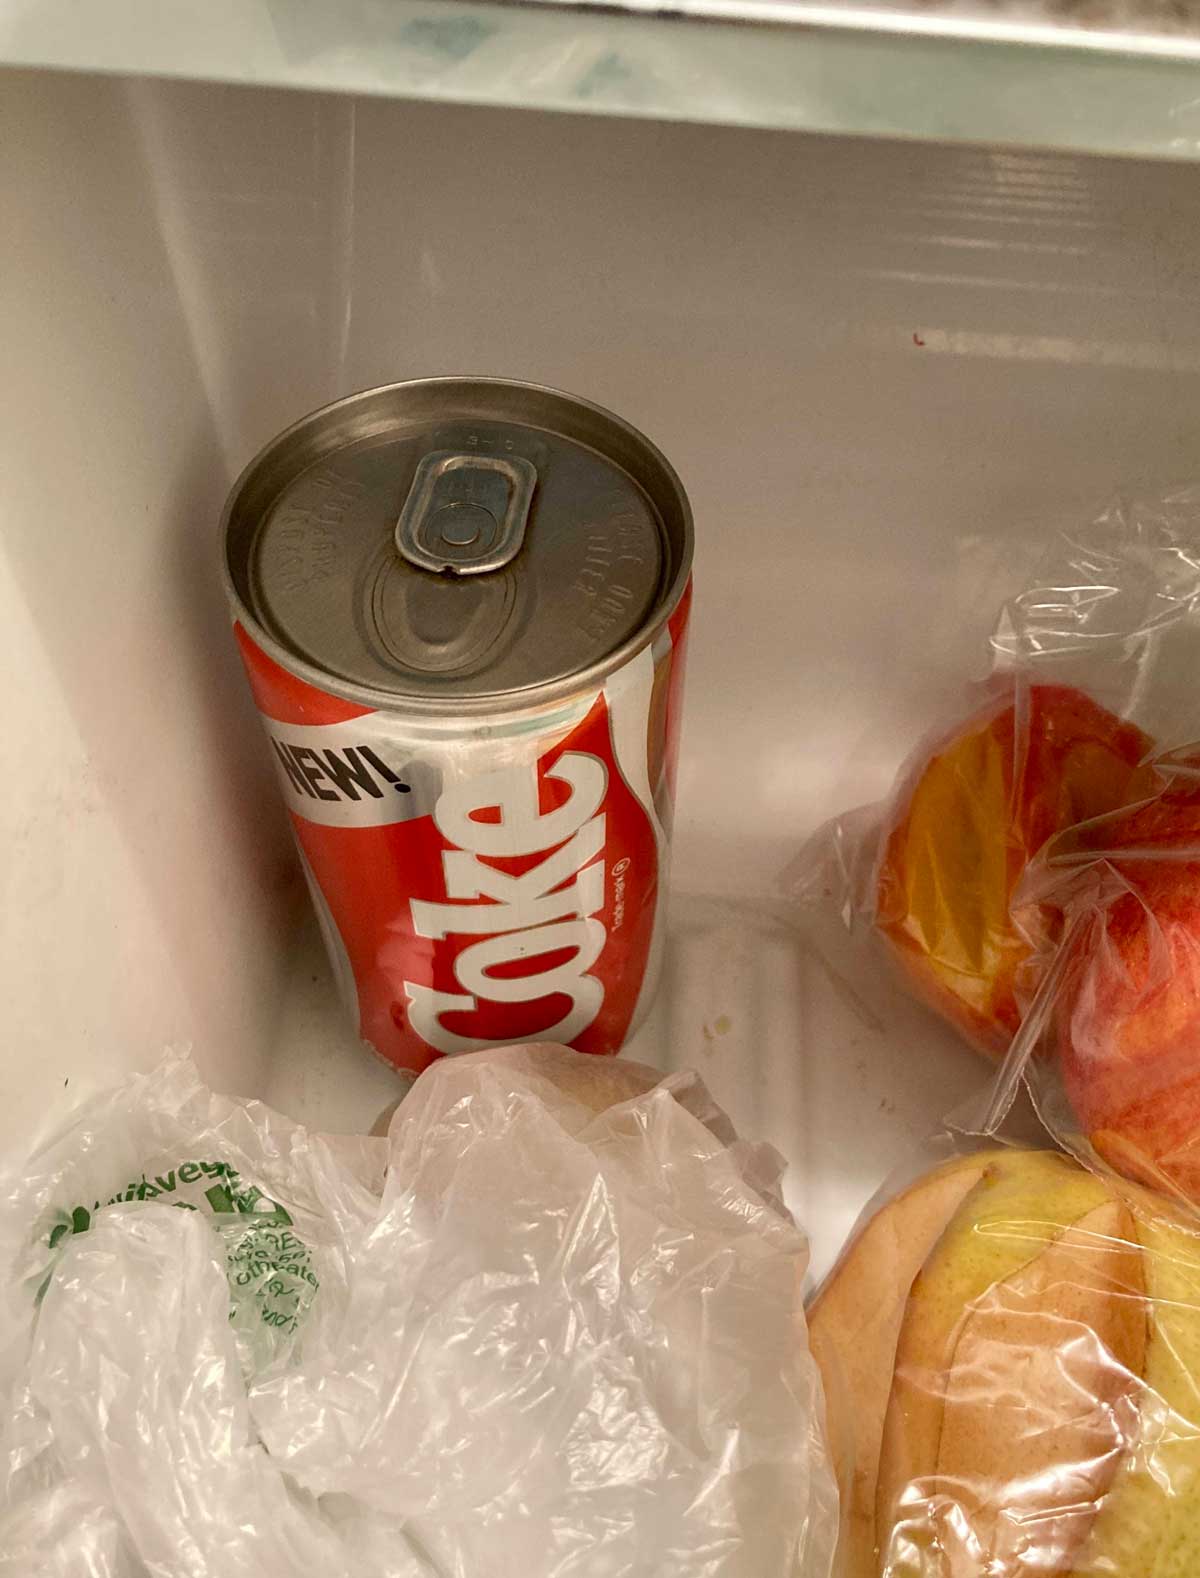 My grandma still has an unopened New Coke can in her fridge from 1985